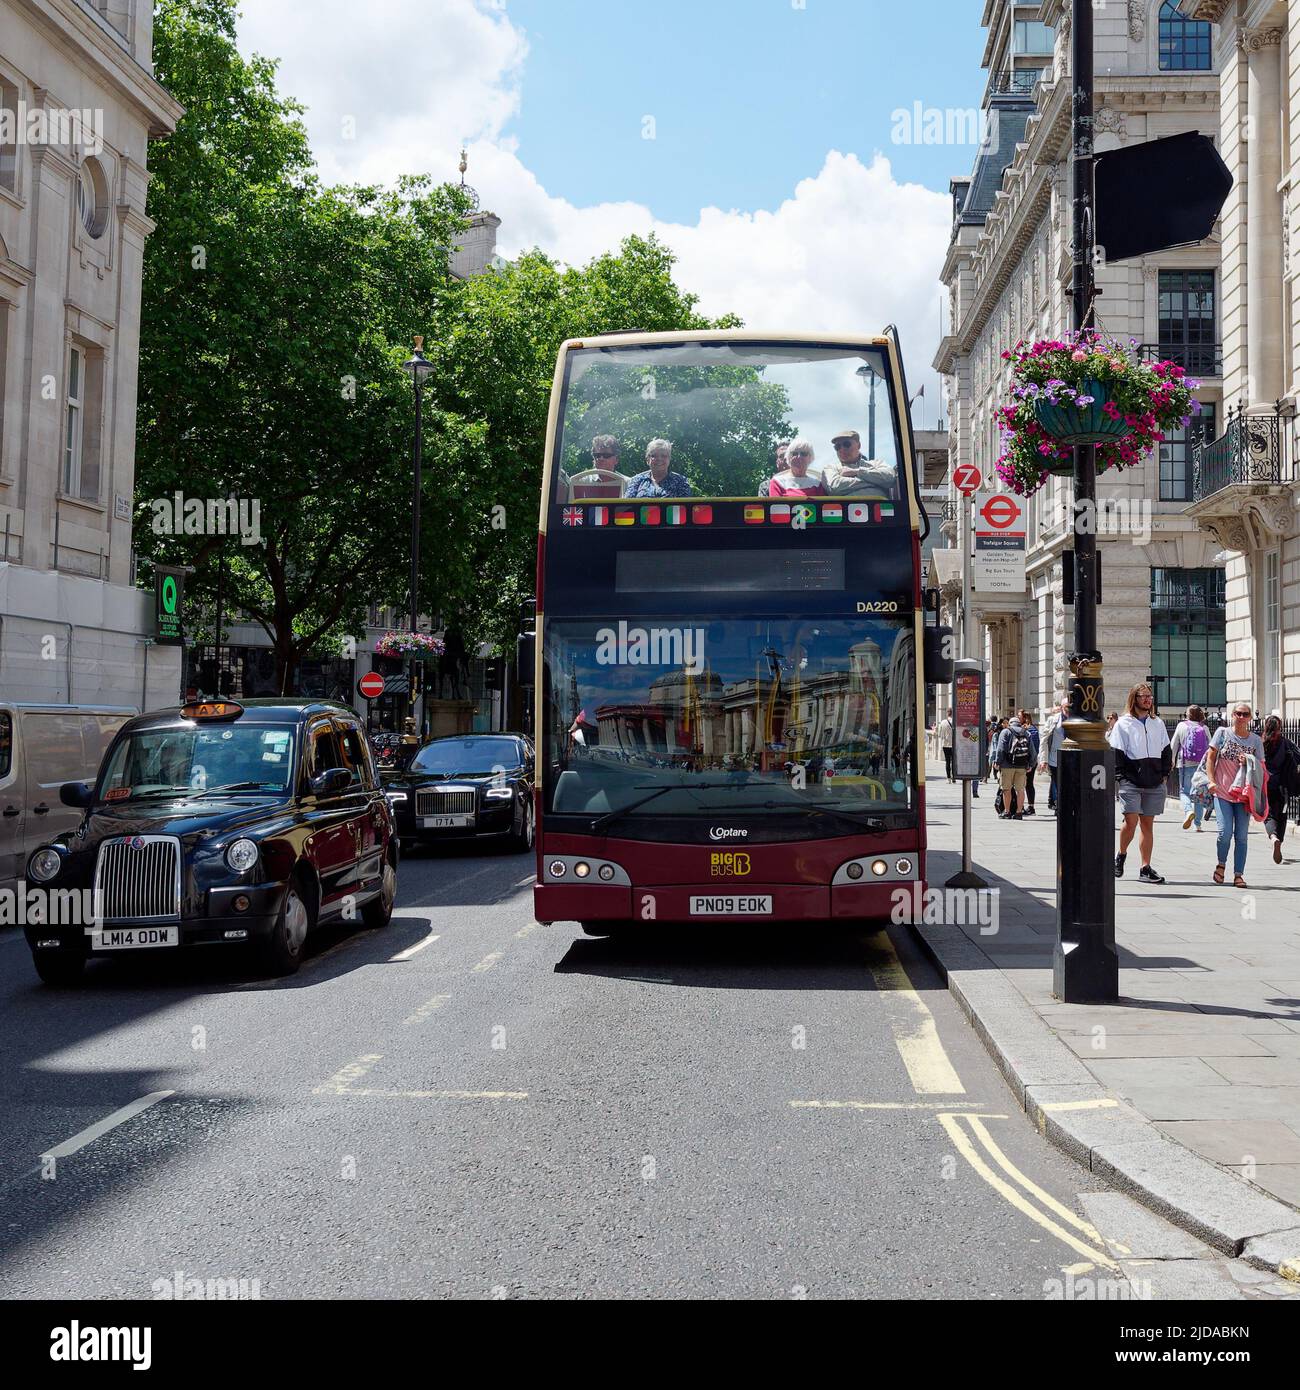 London, Greater London, England, June 08 2022: Tourists sitting on an Open top bus on a street with a taxi beside. Stock Photo